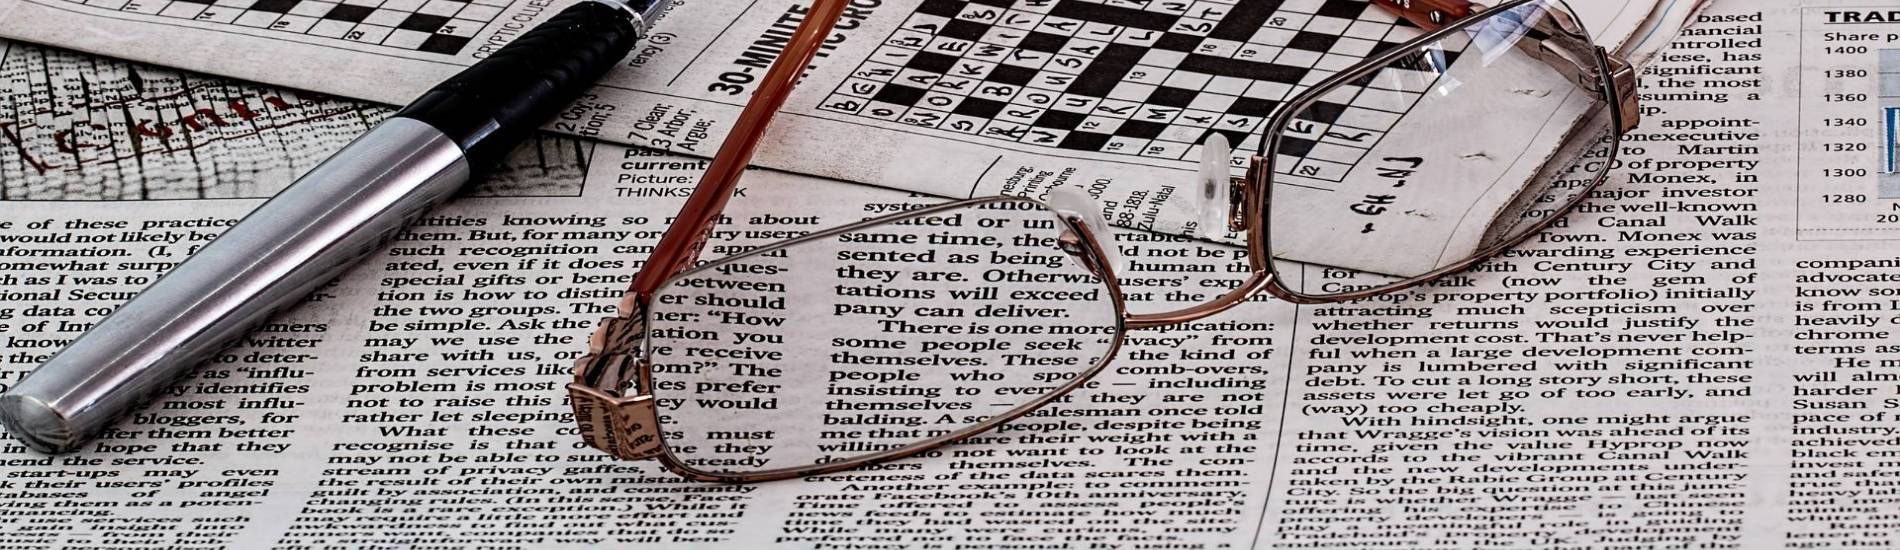 Image of newspaper, crossword puzzle, eyeglasses, and a pen